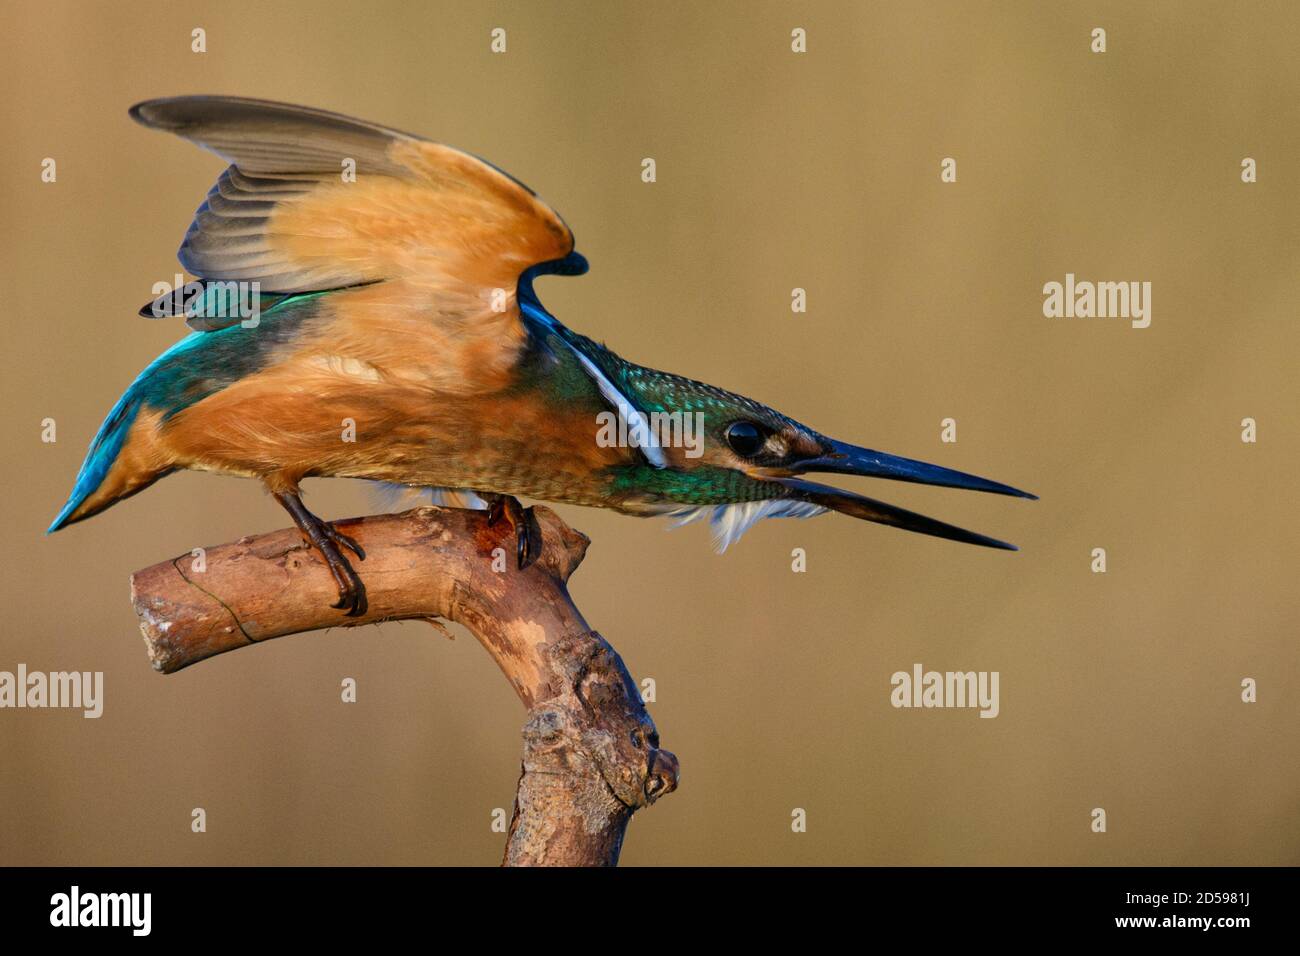 Super close up of Male Common Kingfisher (Alcedo atthis) in nature with open wings. Stock Photo